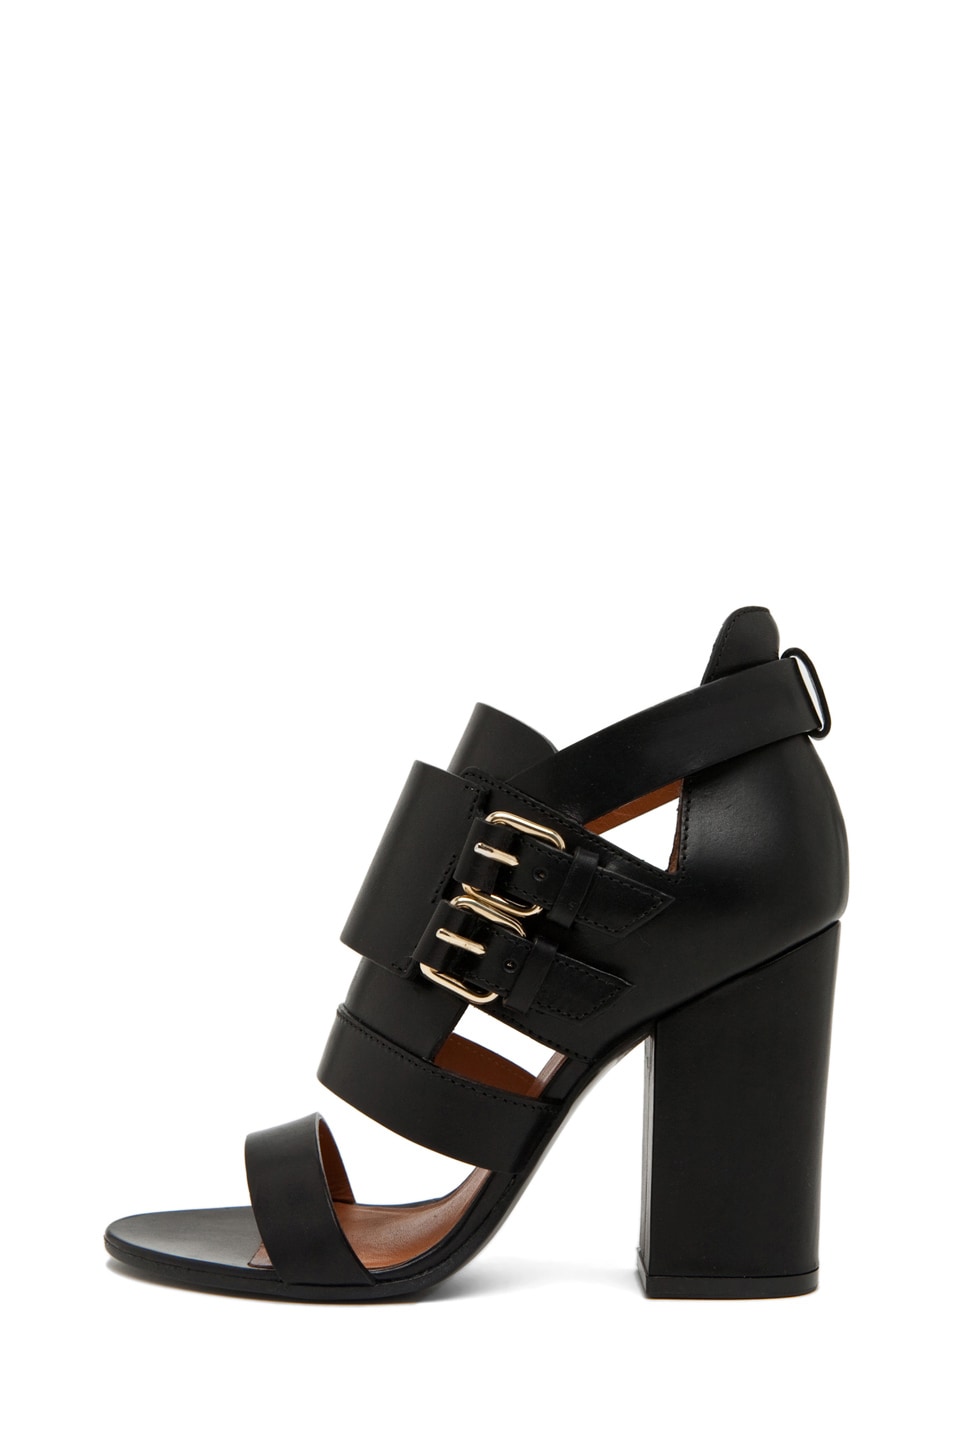 Image 1 of Givenchy Vittorias Heel in Black